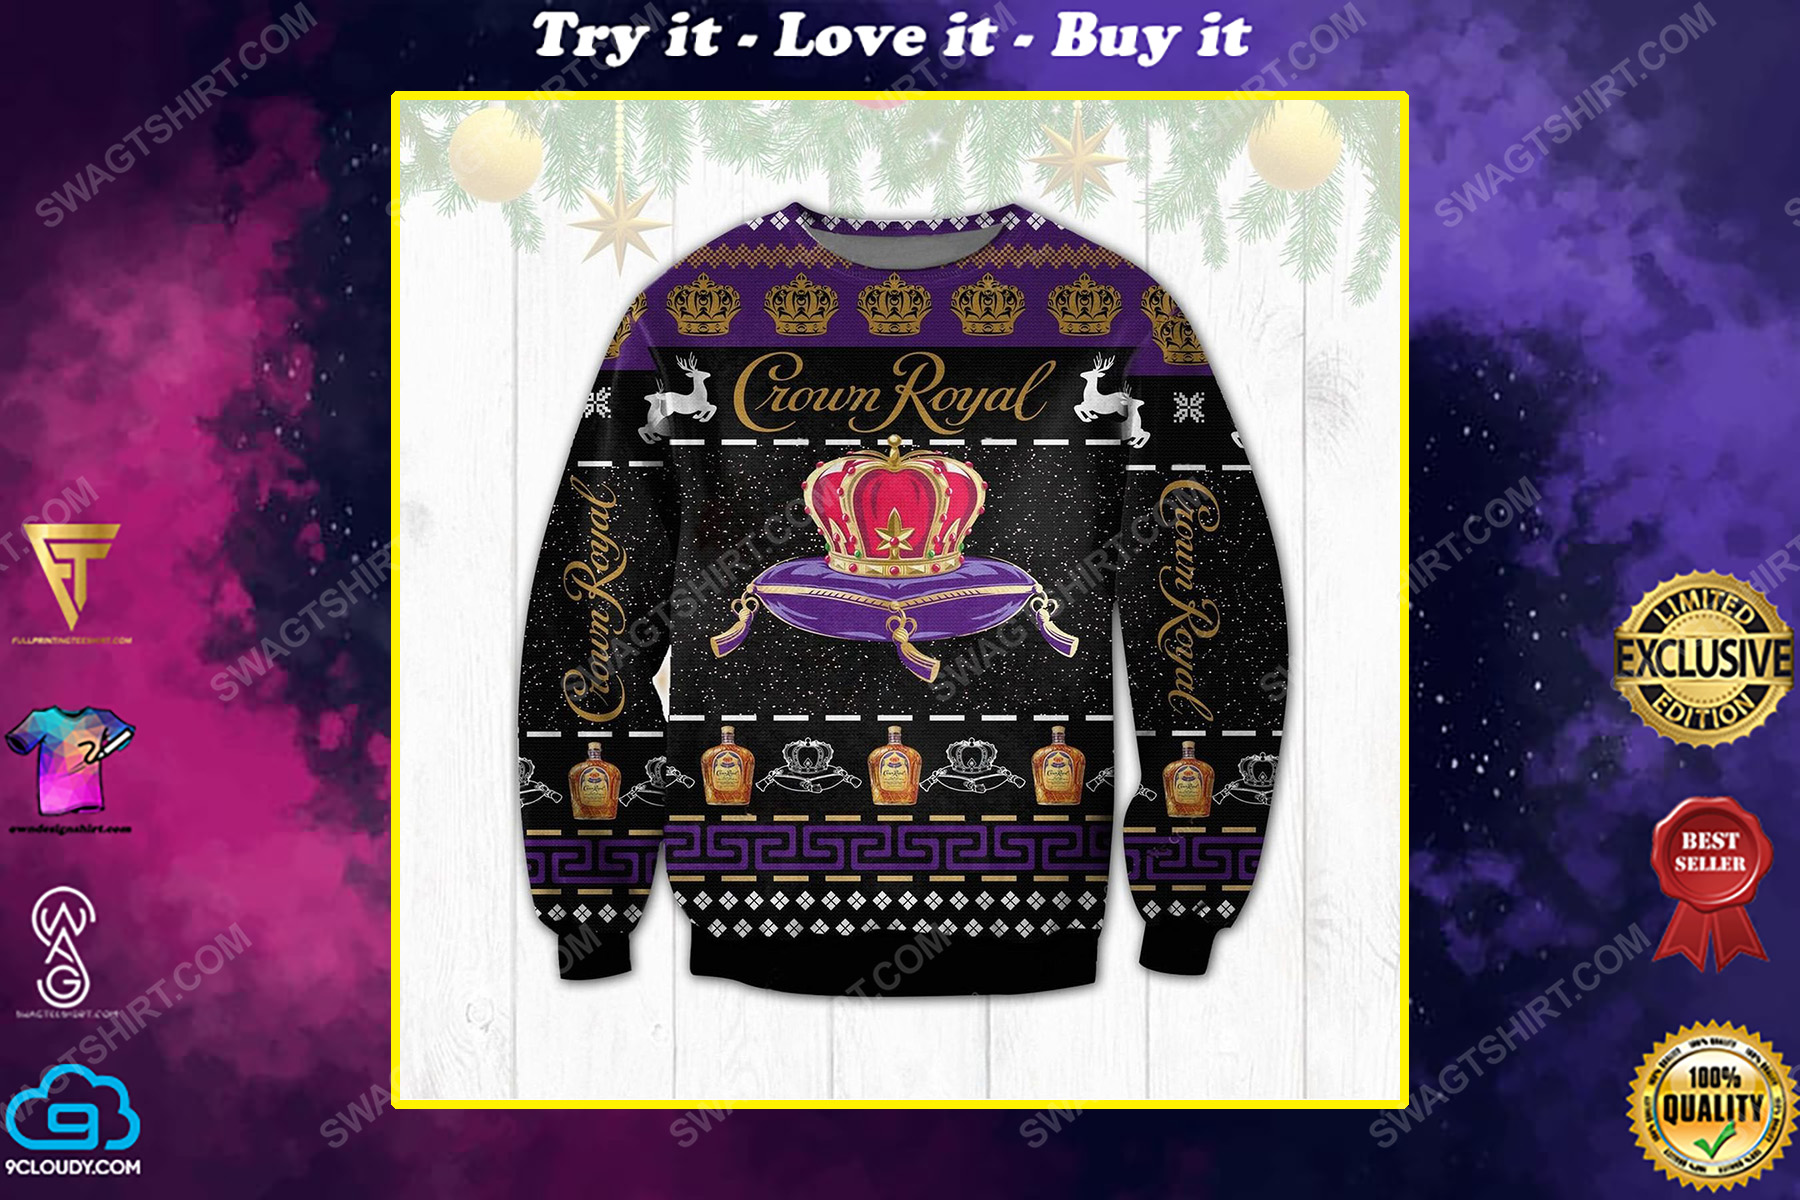 Crown royal canadian whisky ugly christmas sweater